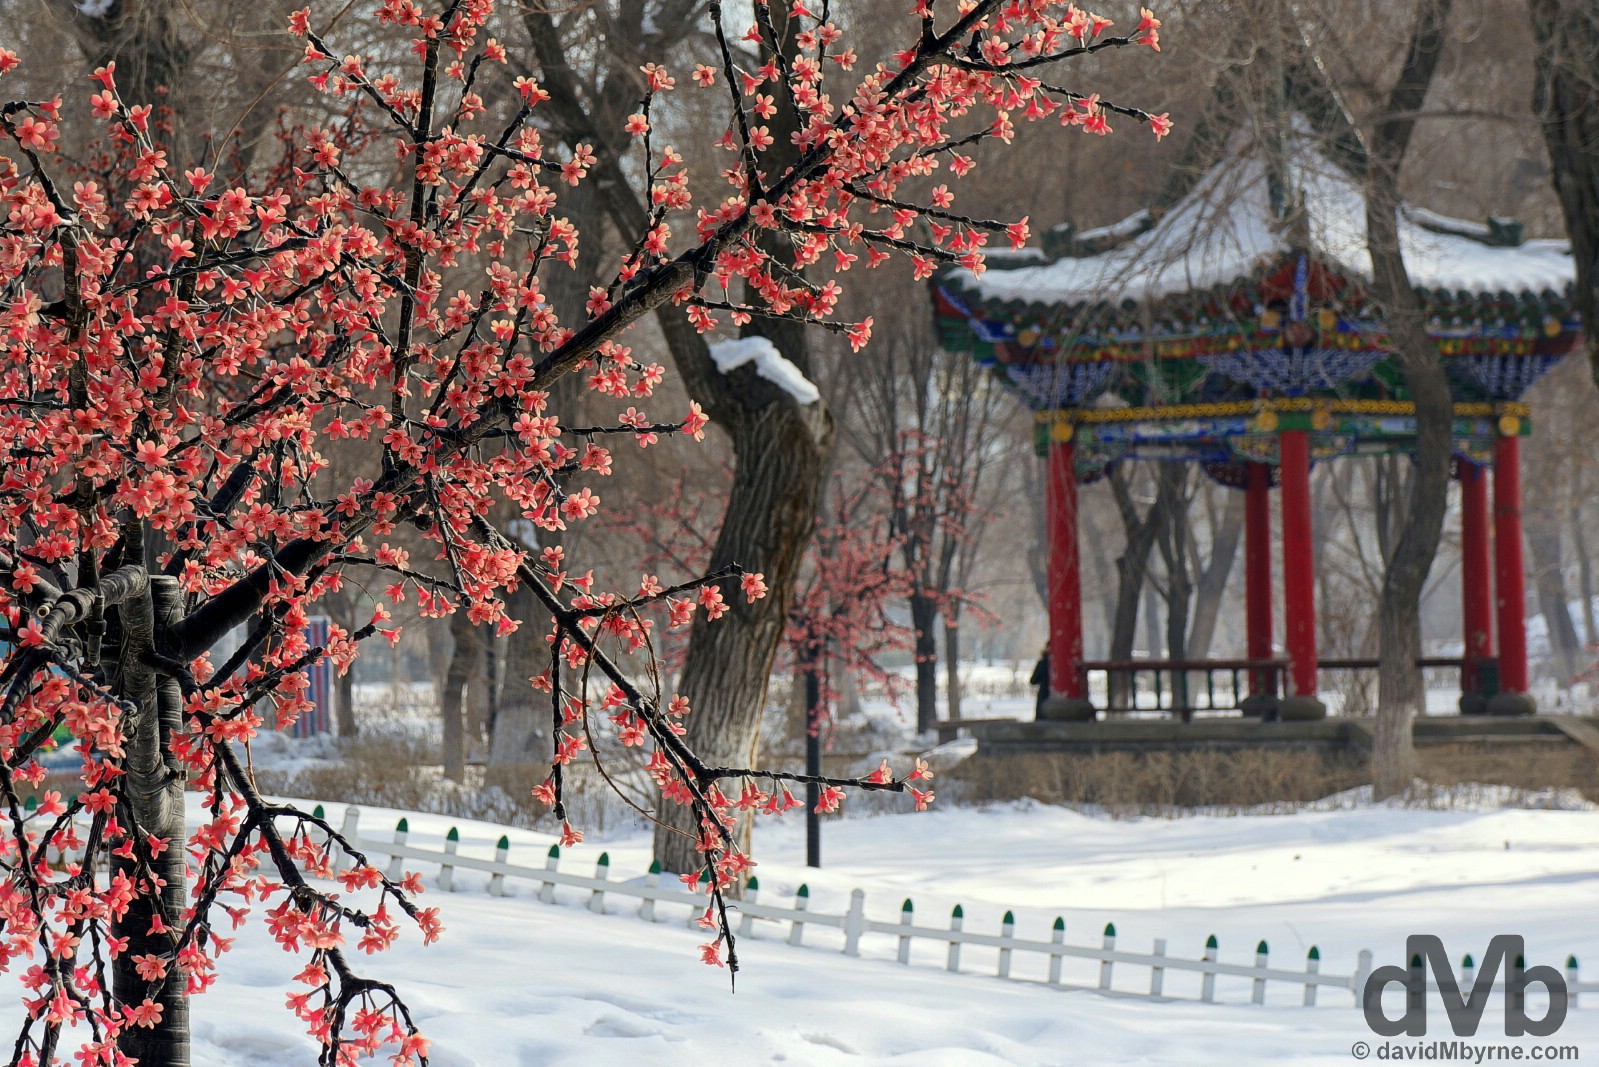 Wintry scenes in Renmin/People's Park in central Urumqi, northwest China. February 10, 2015.  